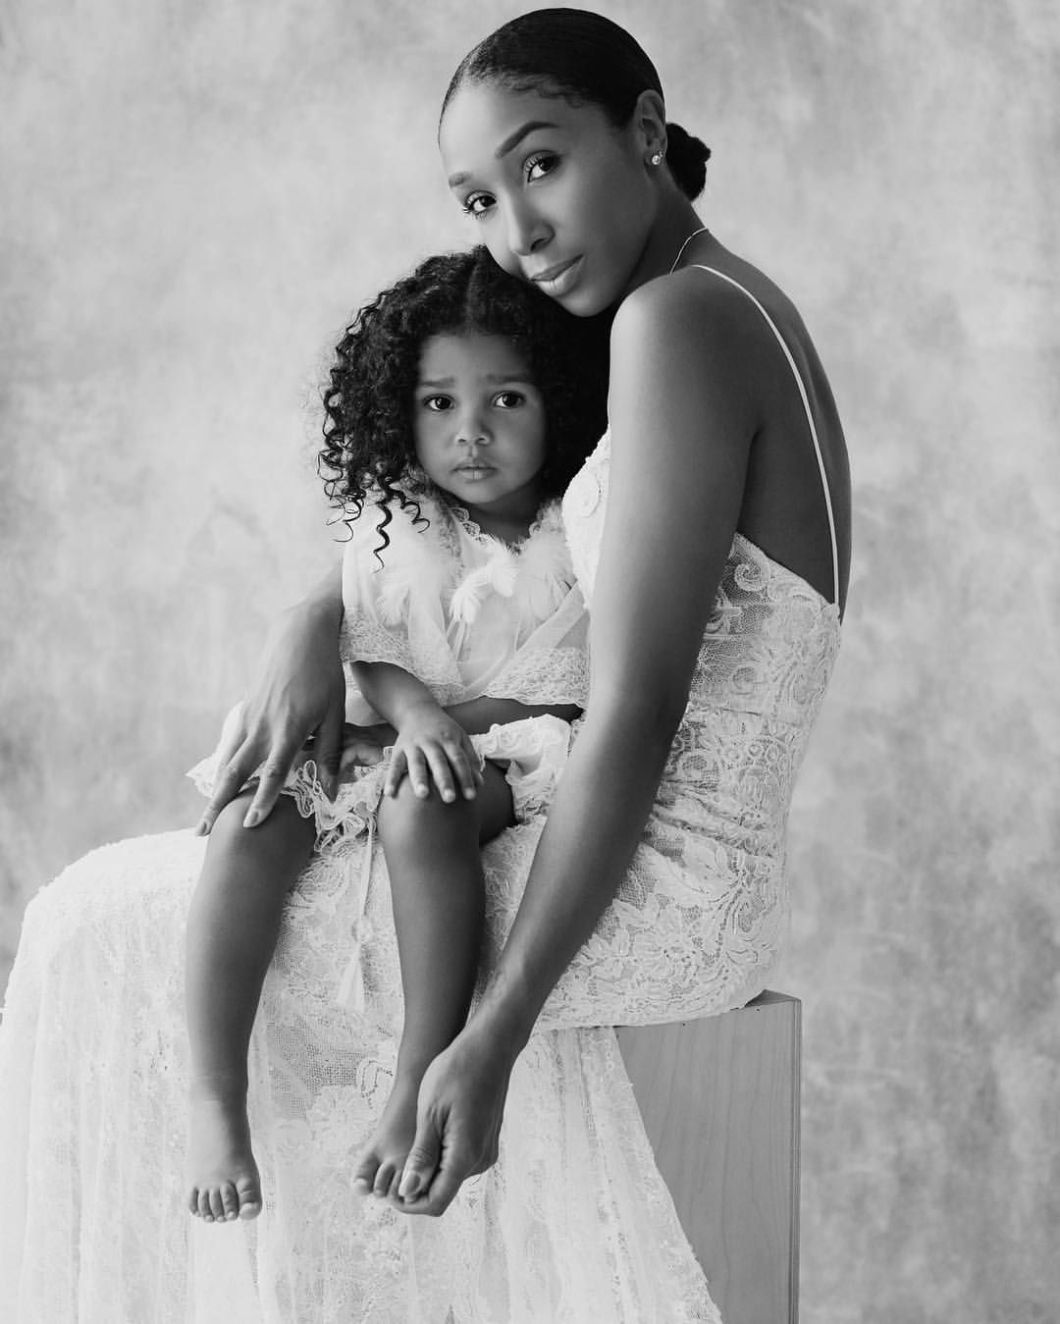 Mommy and Me Shoot via Pinterest of Melanie Marie and daughter